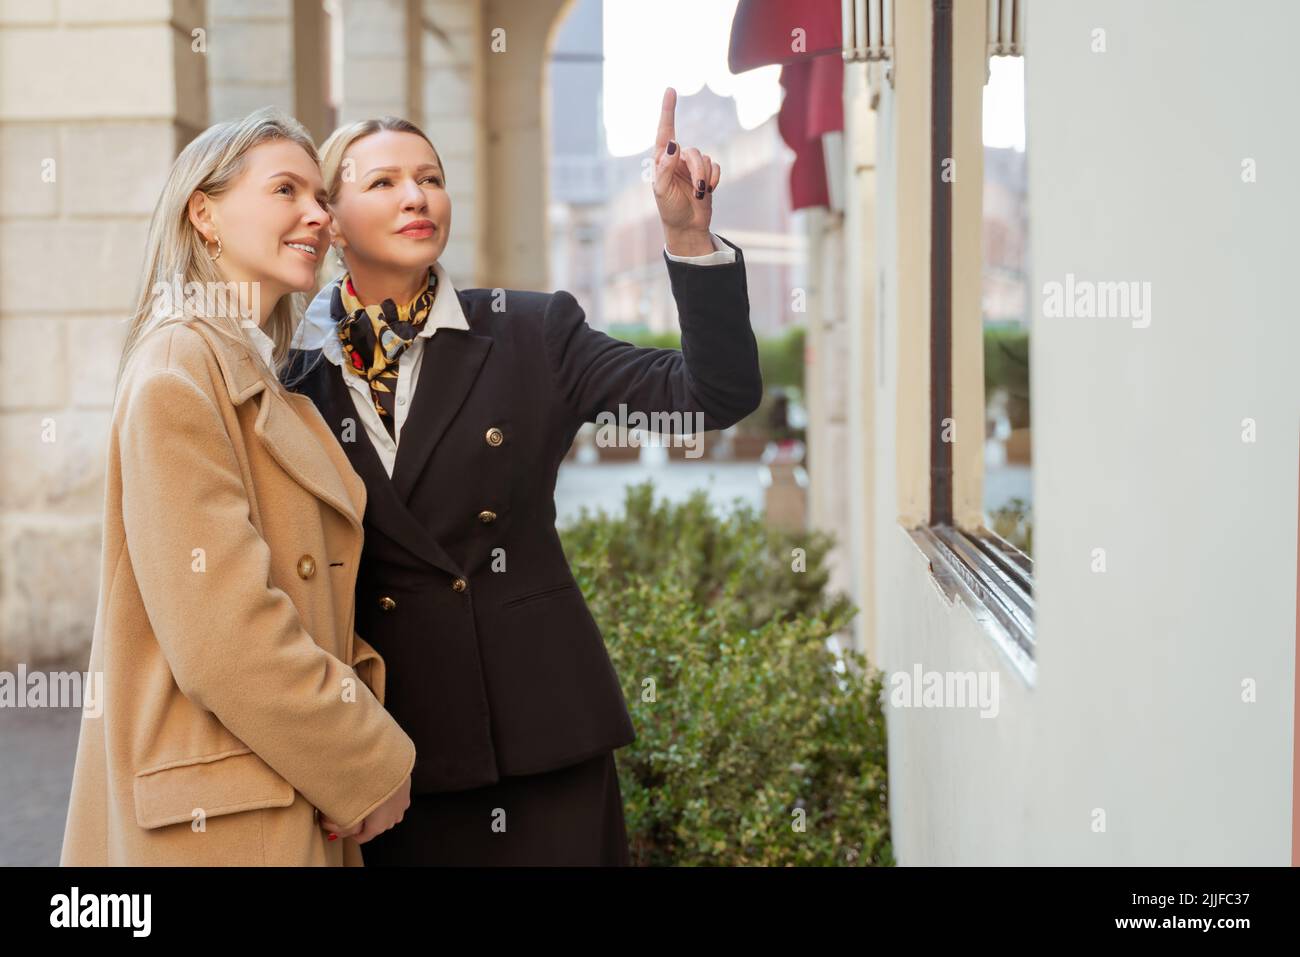 Lady showing places of interest to her female guest Stock Photo